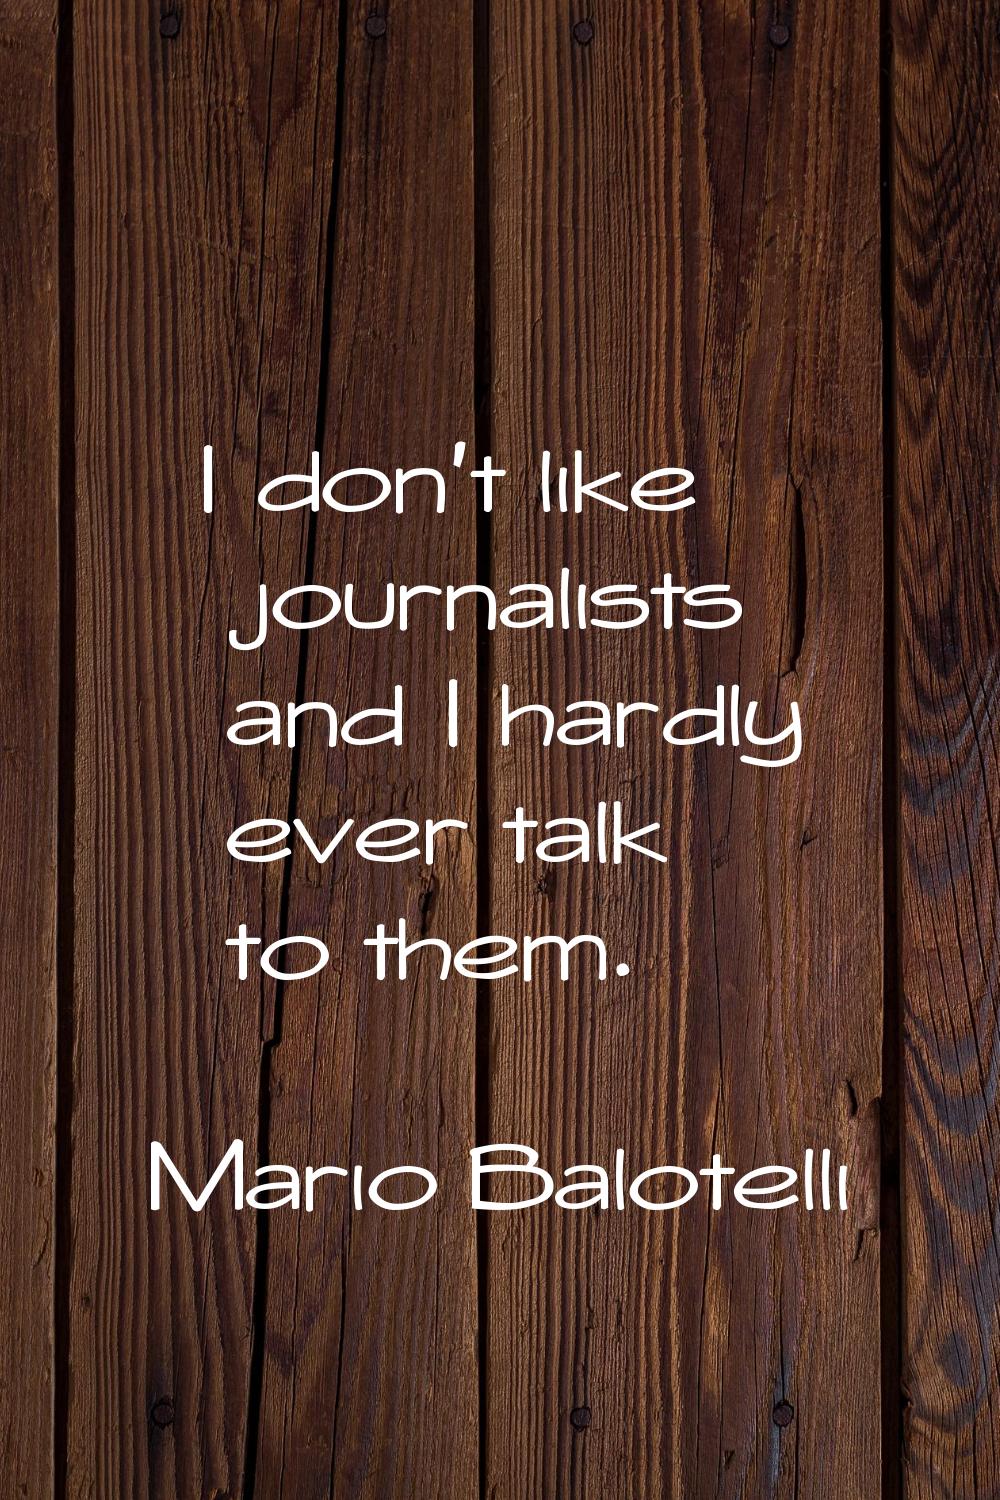 I don't like journalists and I hardly ever talk to them.